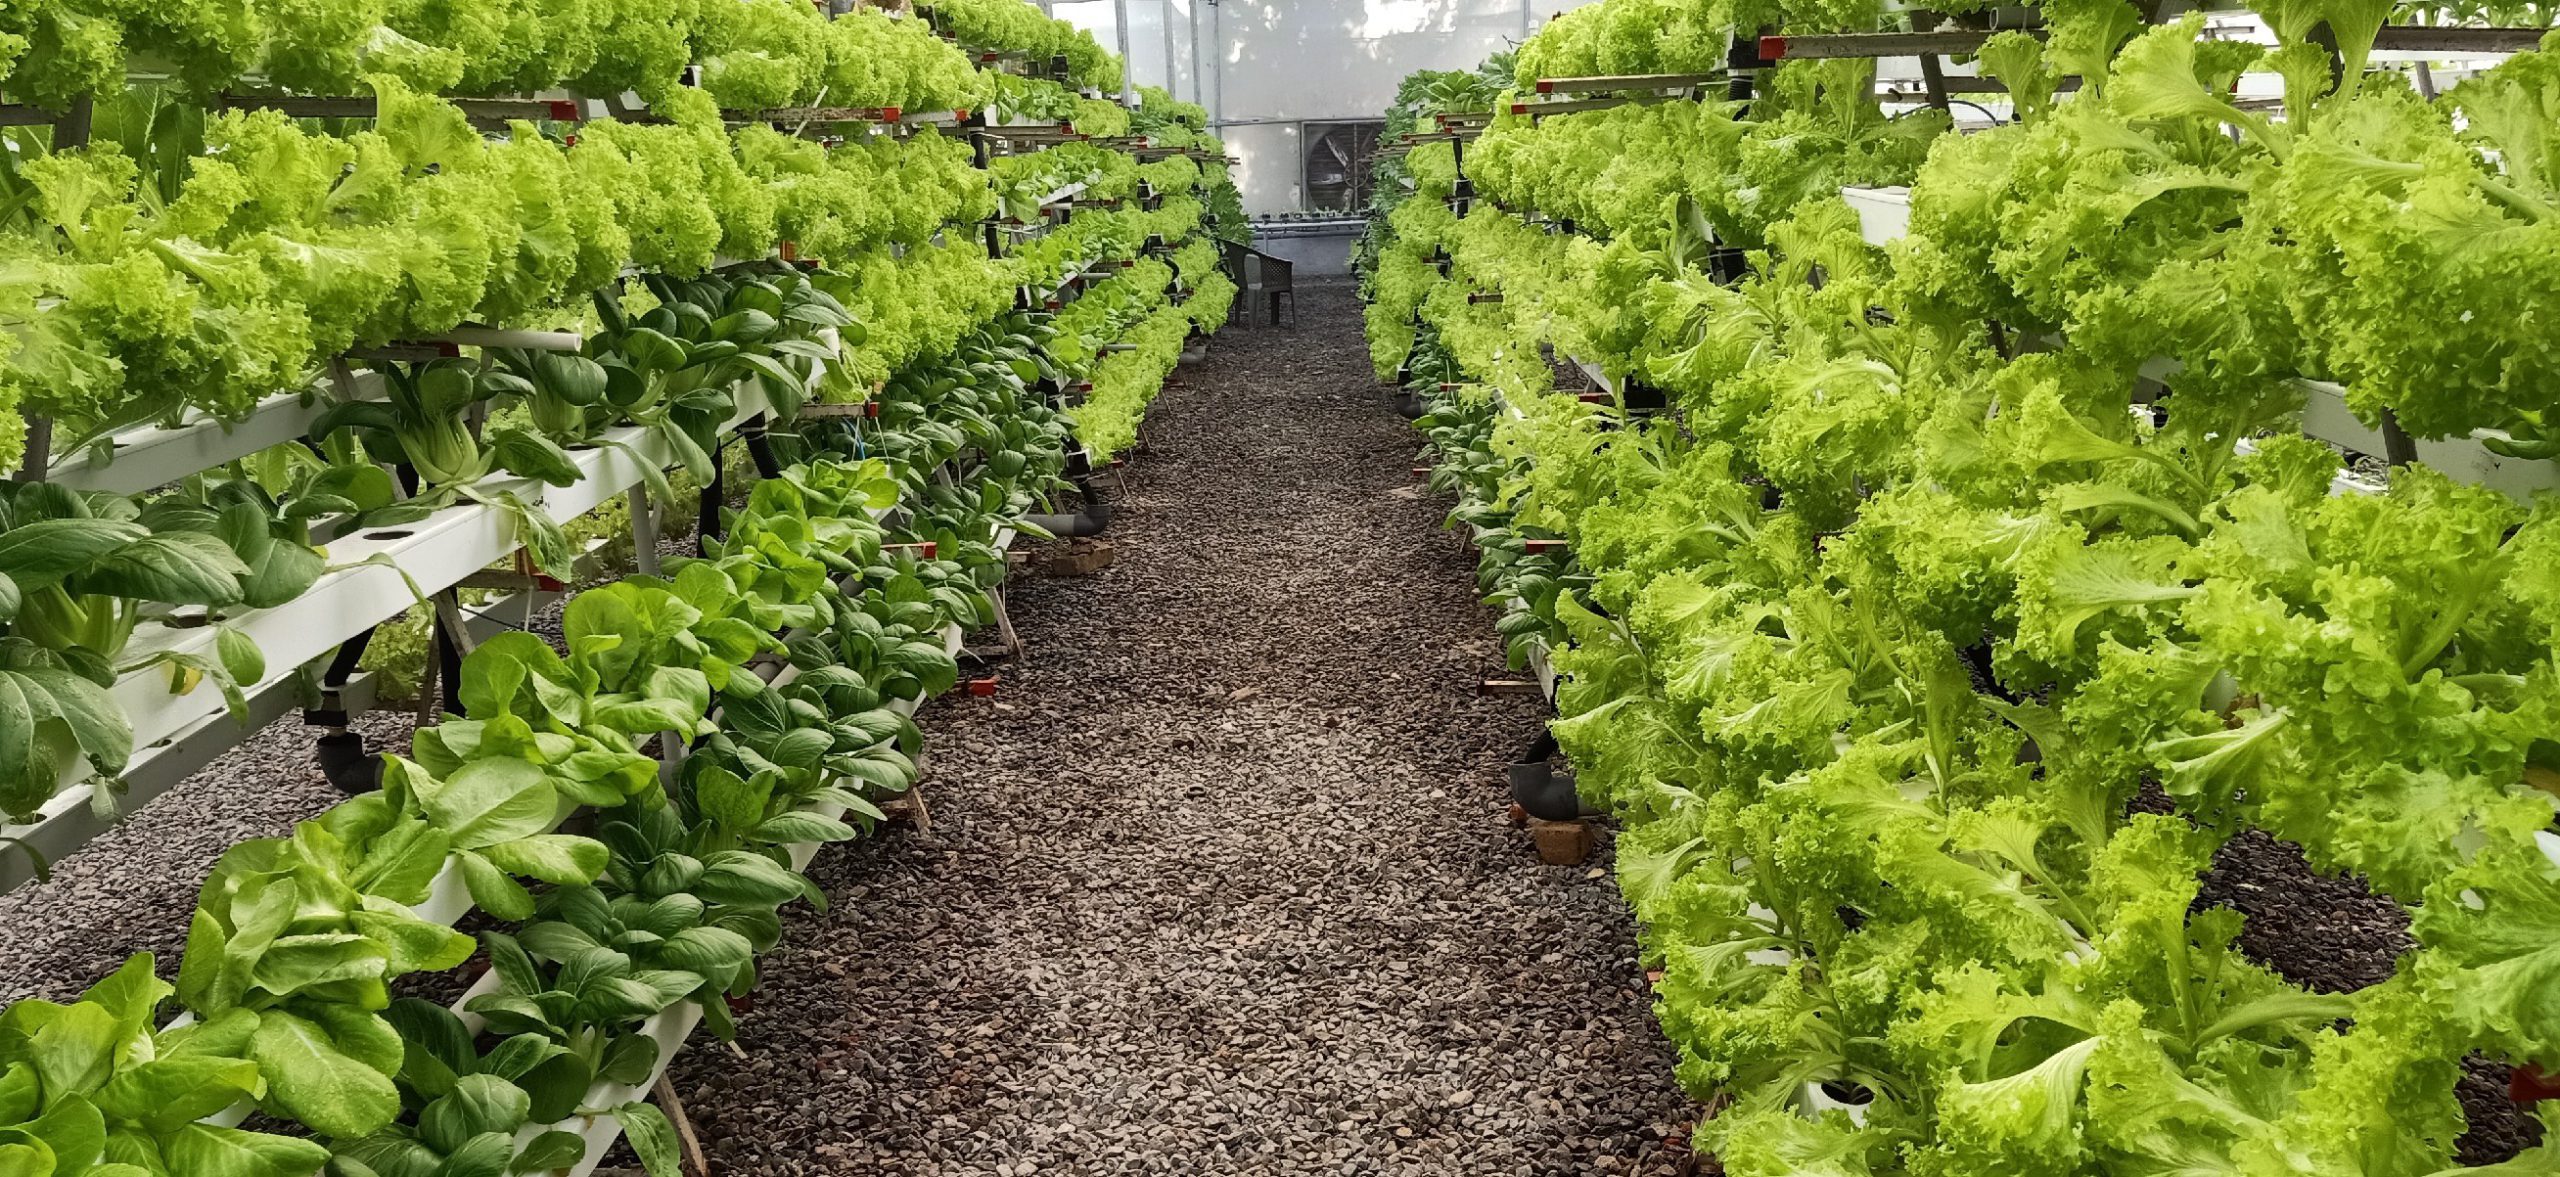 Hydroponics startups are slowly growing on Indian consumers